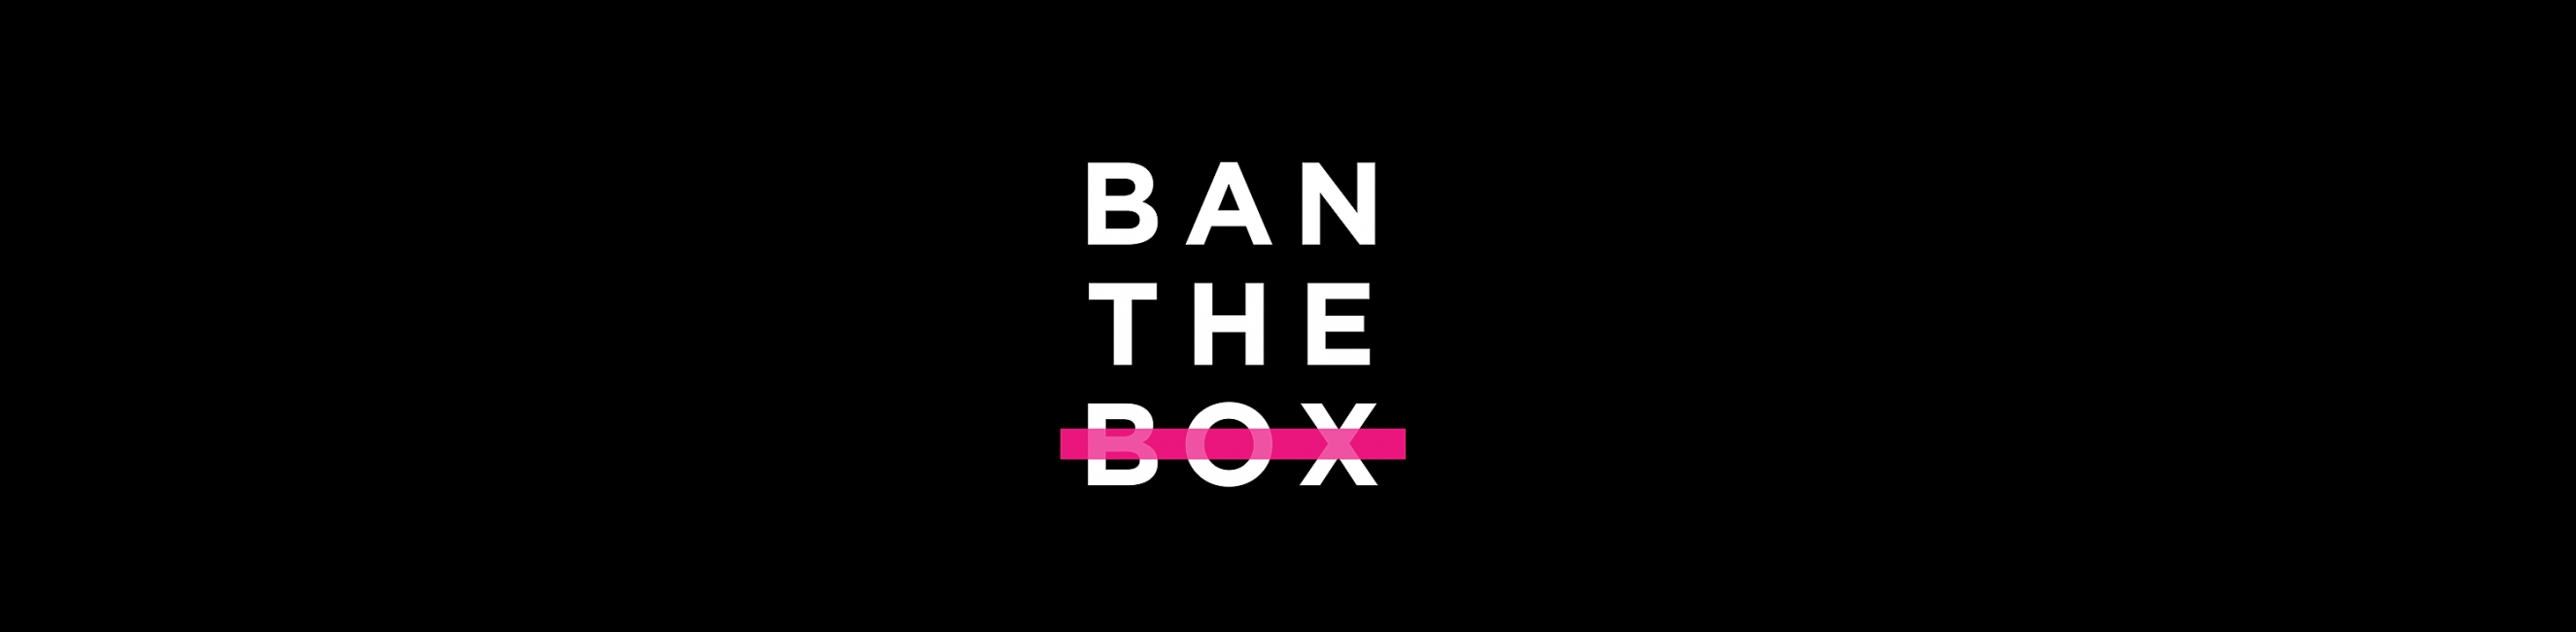 weston college support ban the box